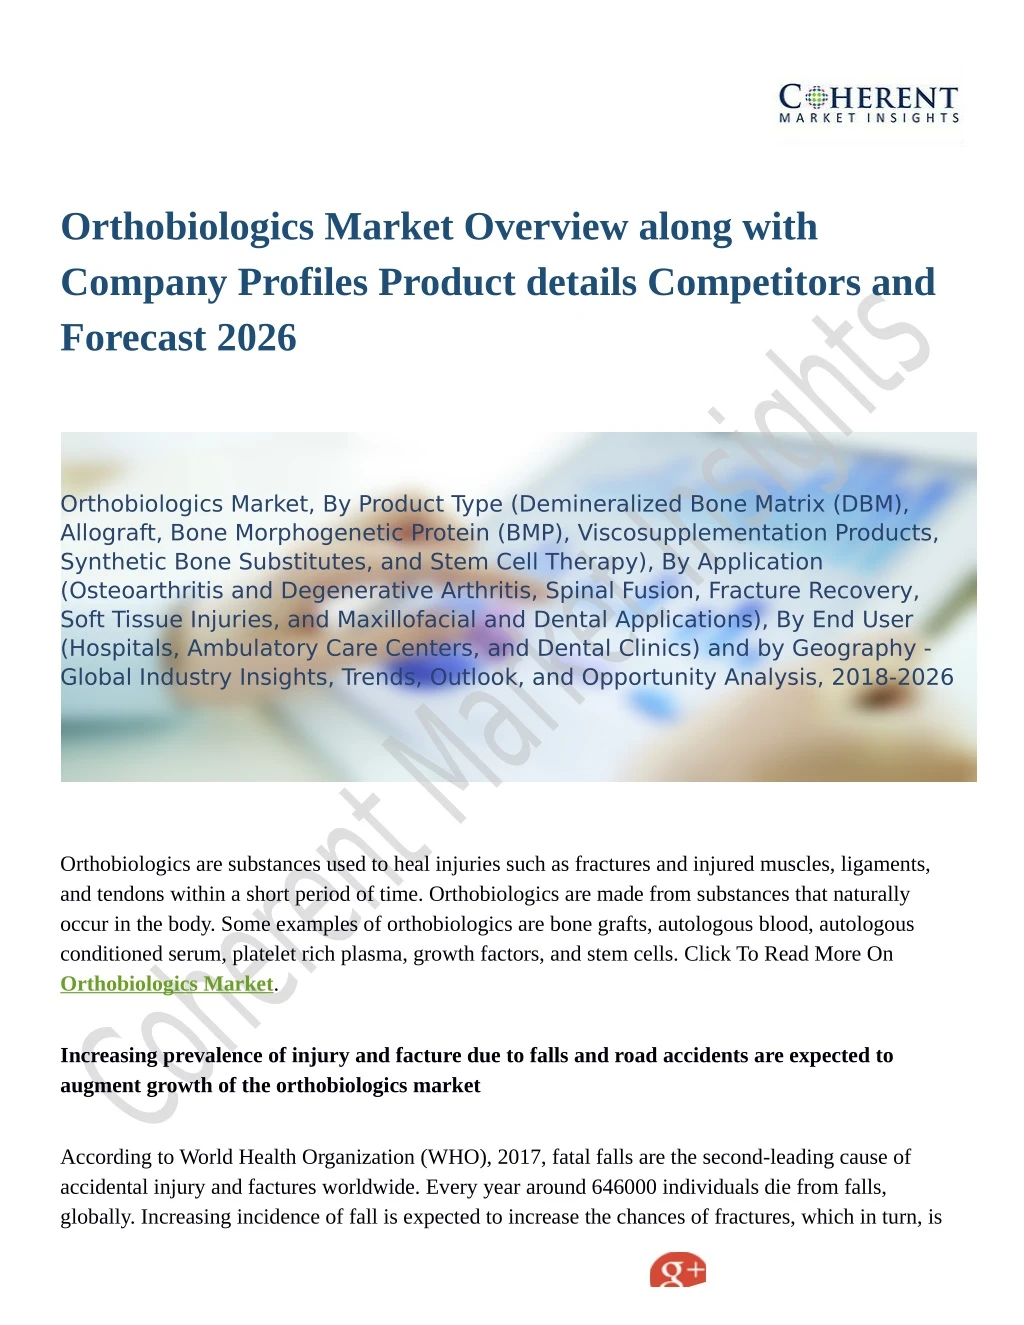 orthobiologics market overview along with company